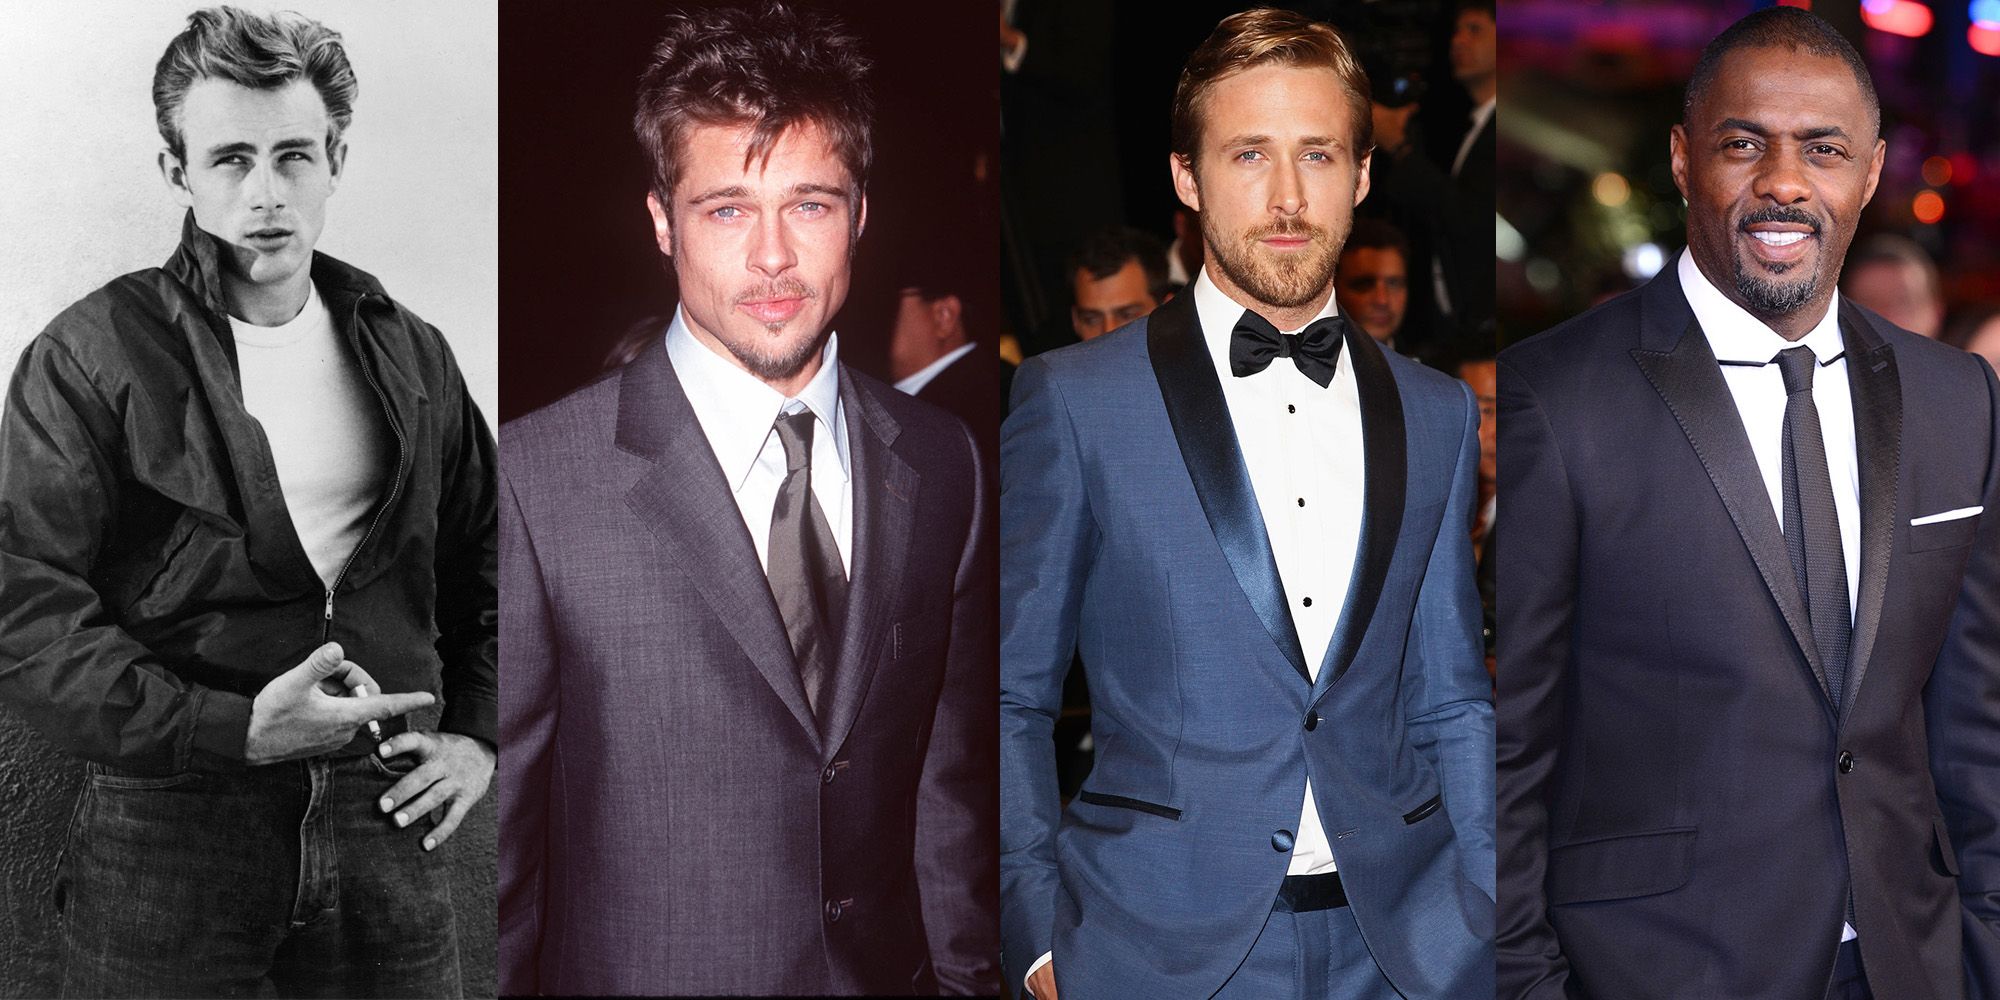 Best looking male celebs of all time